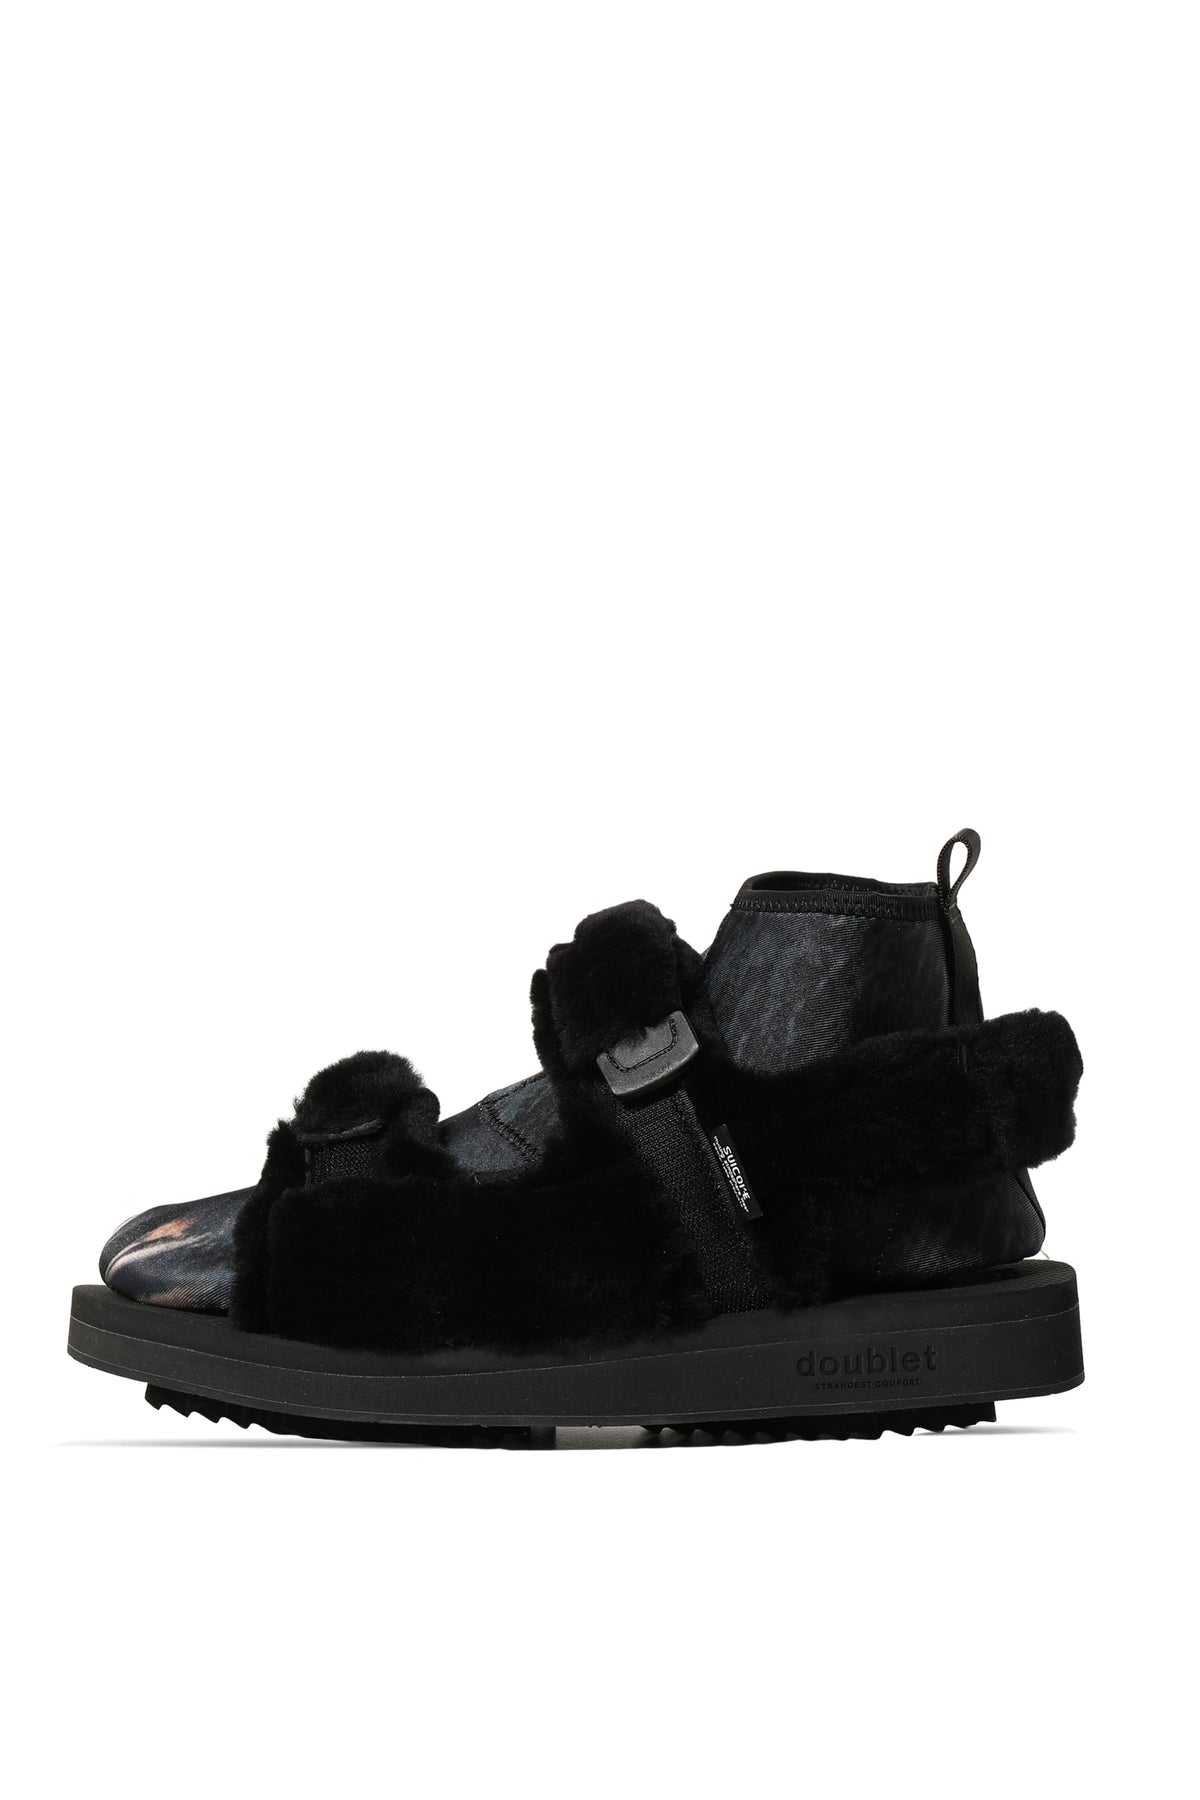 ANIMAL FOOT LAYERED SANDALS / BLK